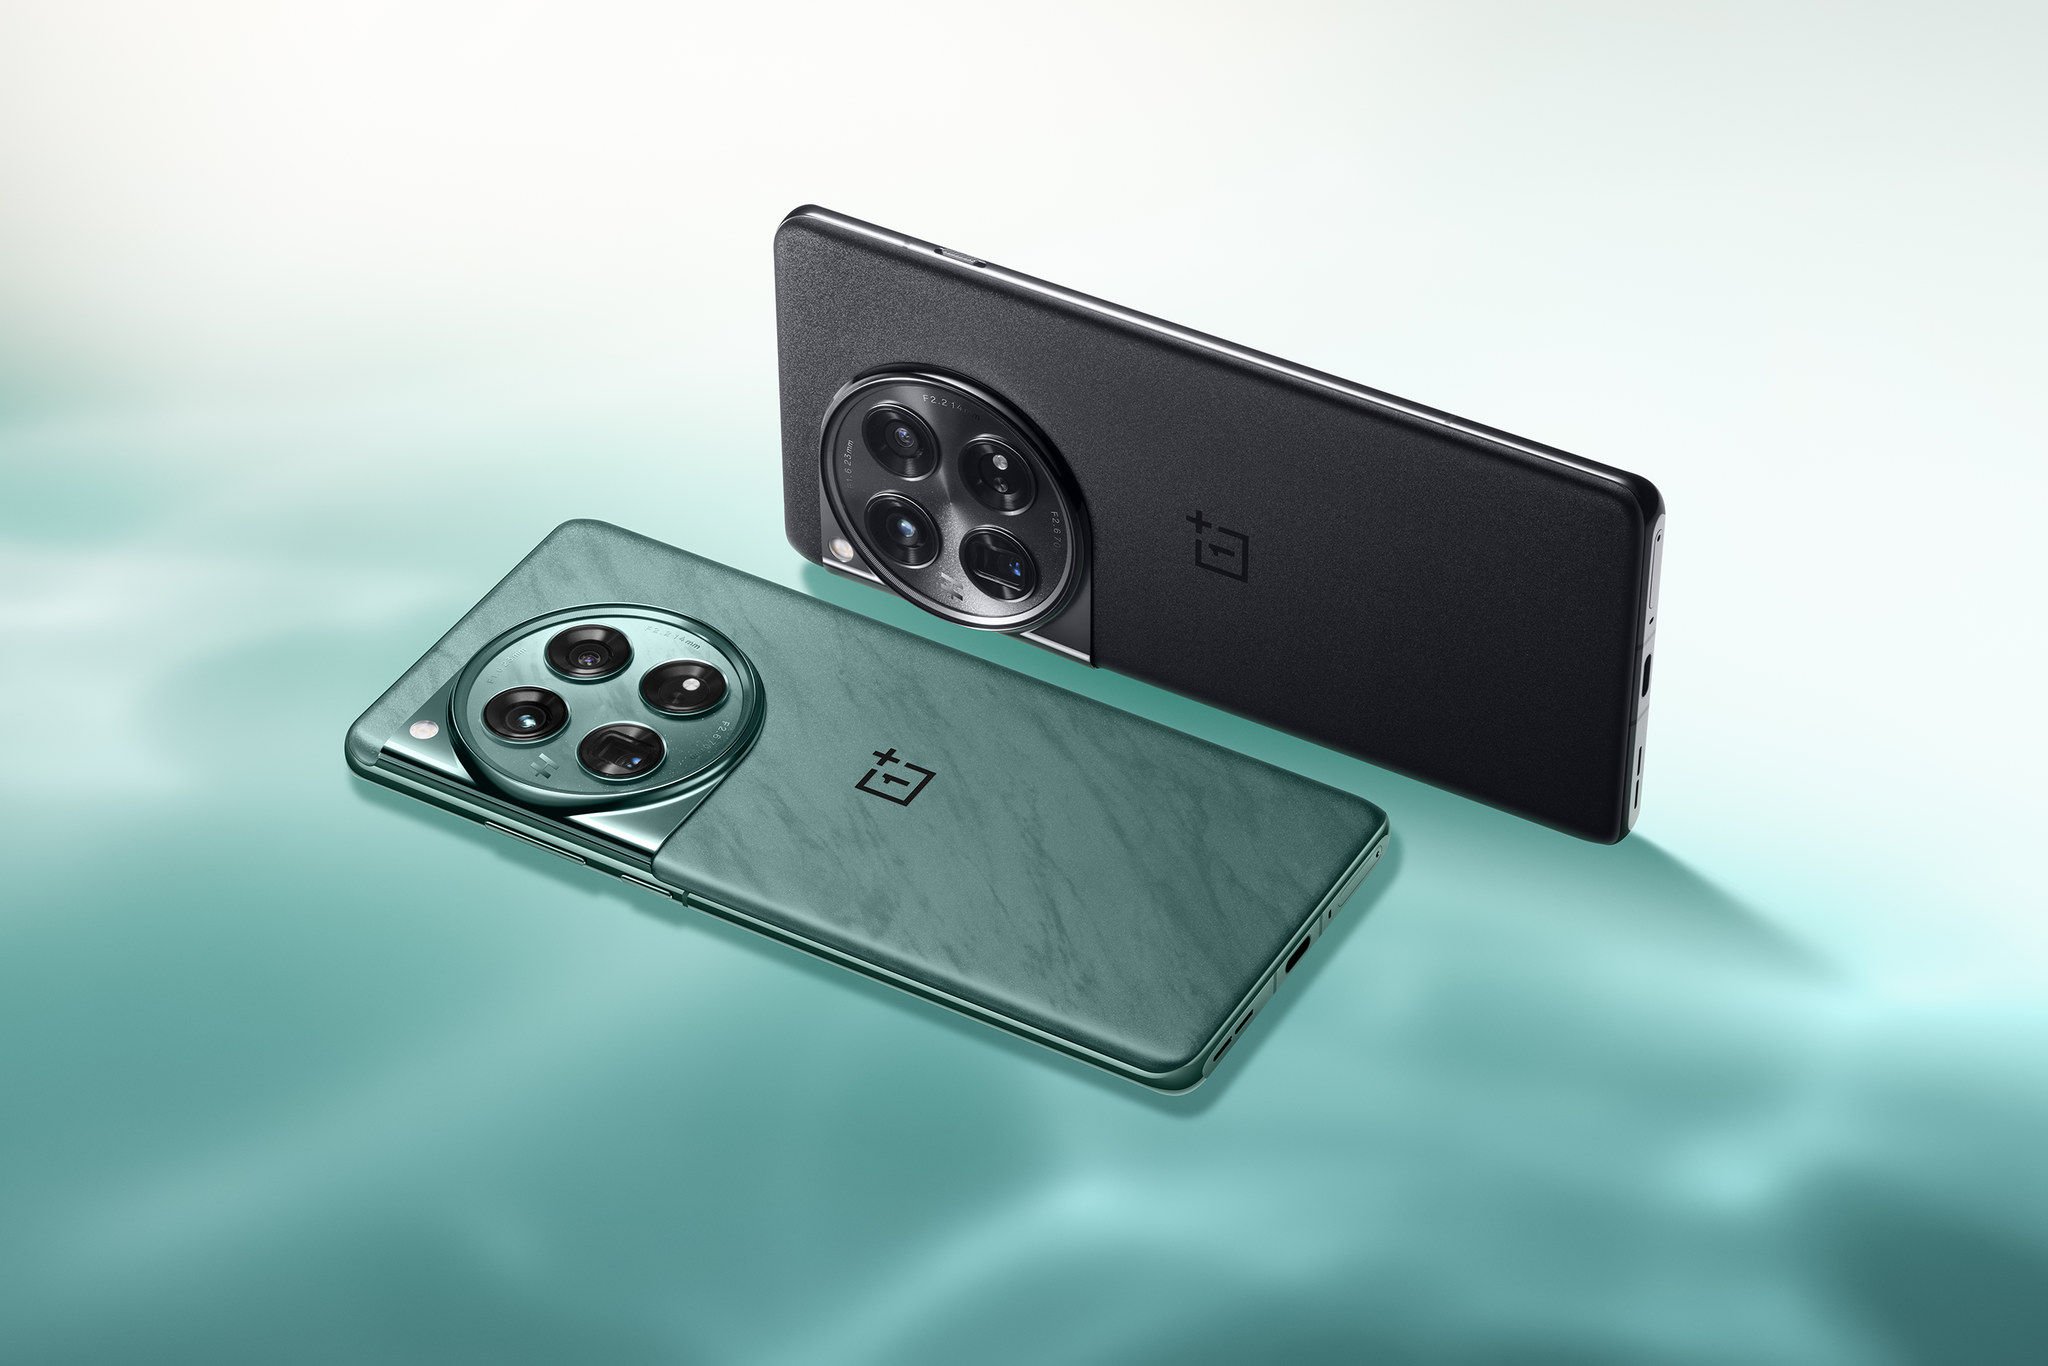 The OnePlus 12 smartphone has three cameras produced in collaboration with Hasselblad, and shoots 4K video. Its display is ultra bright and a fast charger that ships with the phone charges the battery to half capacity in 12 minutes. Photo: OnePlus